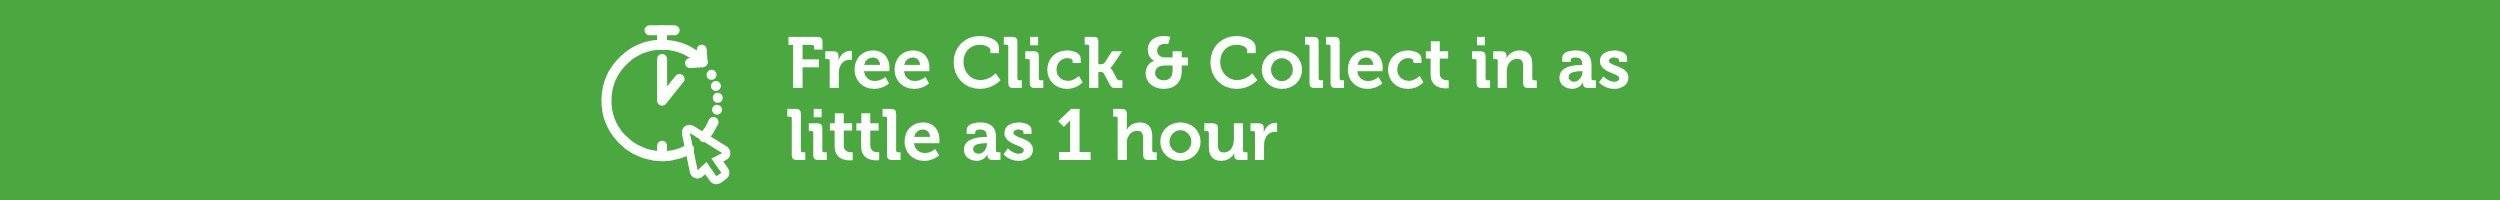 Click & Collect - 1 hour